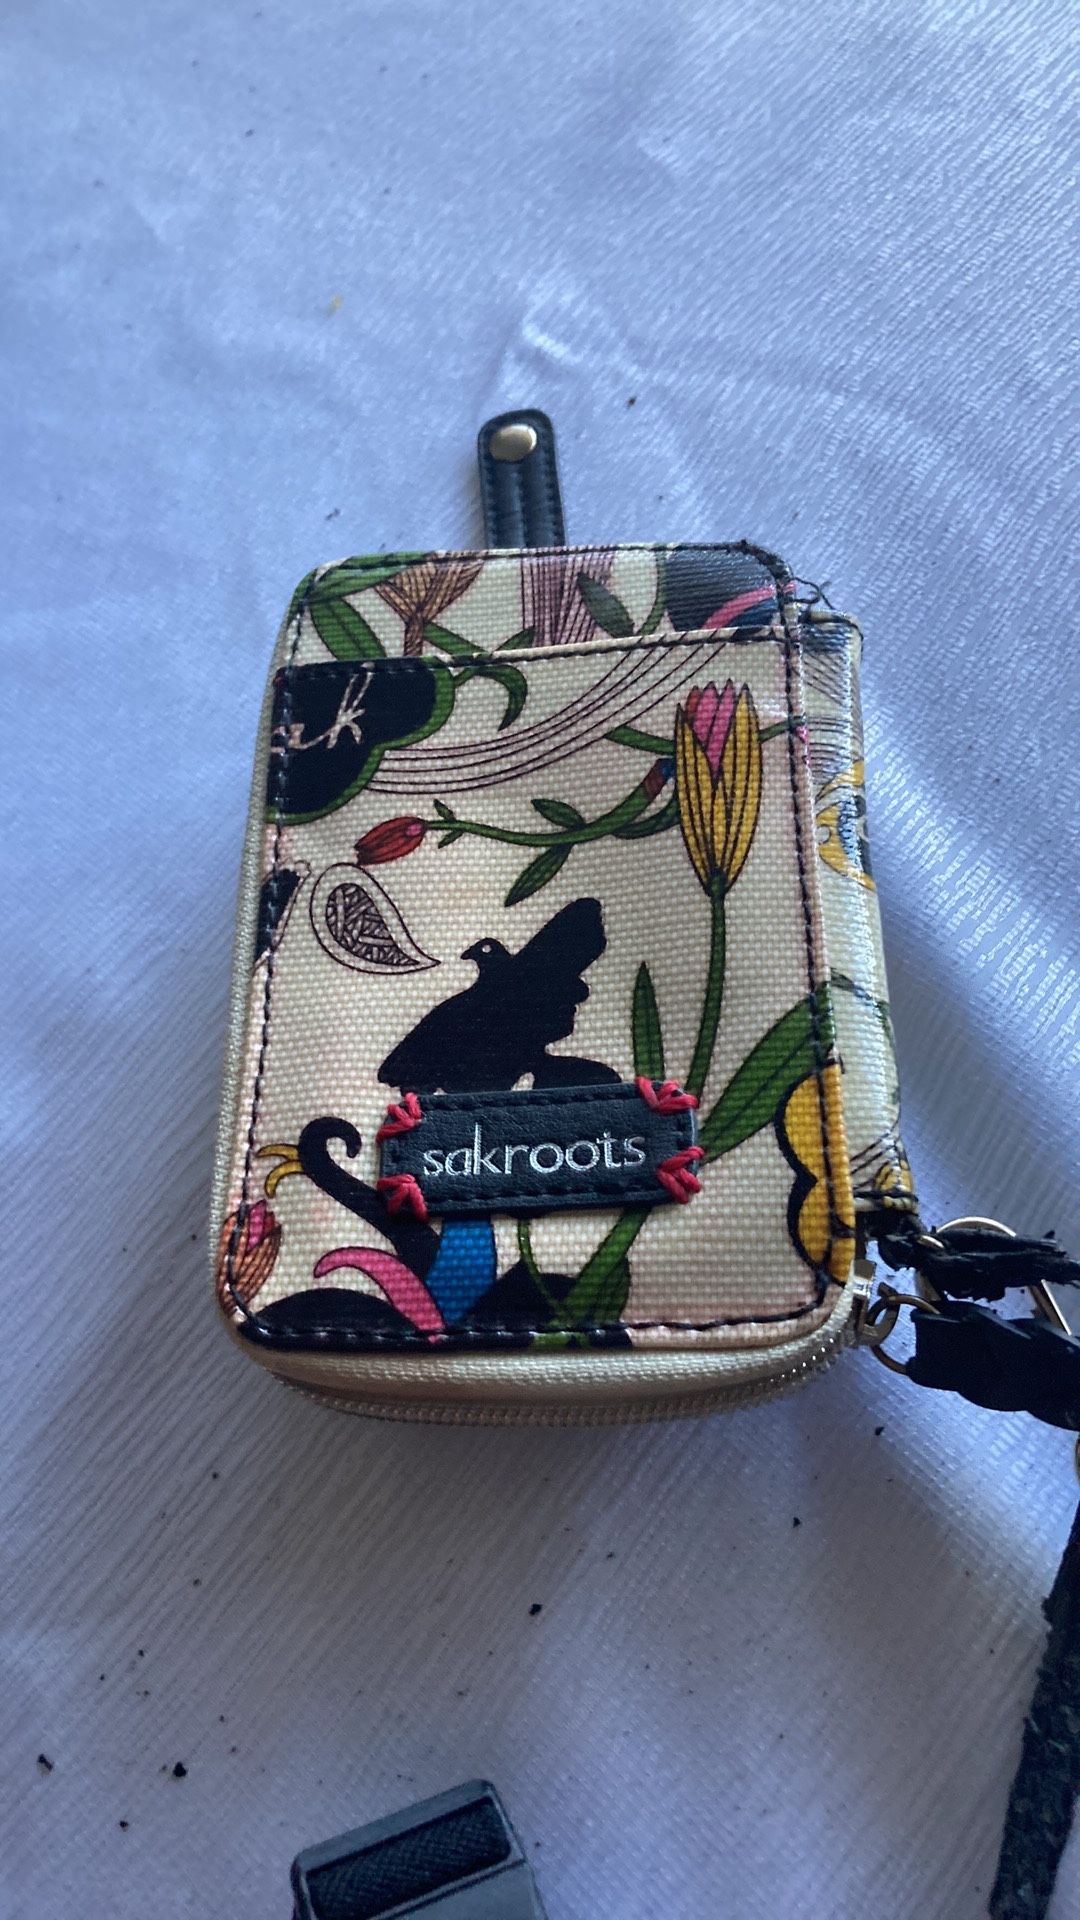 Sakroots Wristlet Many Card Pockets The Cord That Would Hold The Purse Is Dry And Cracked